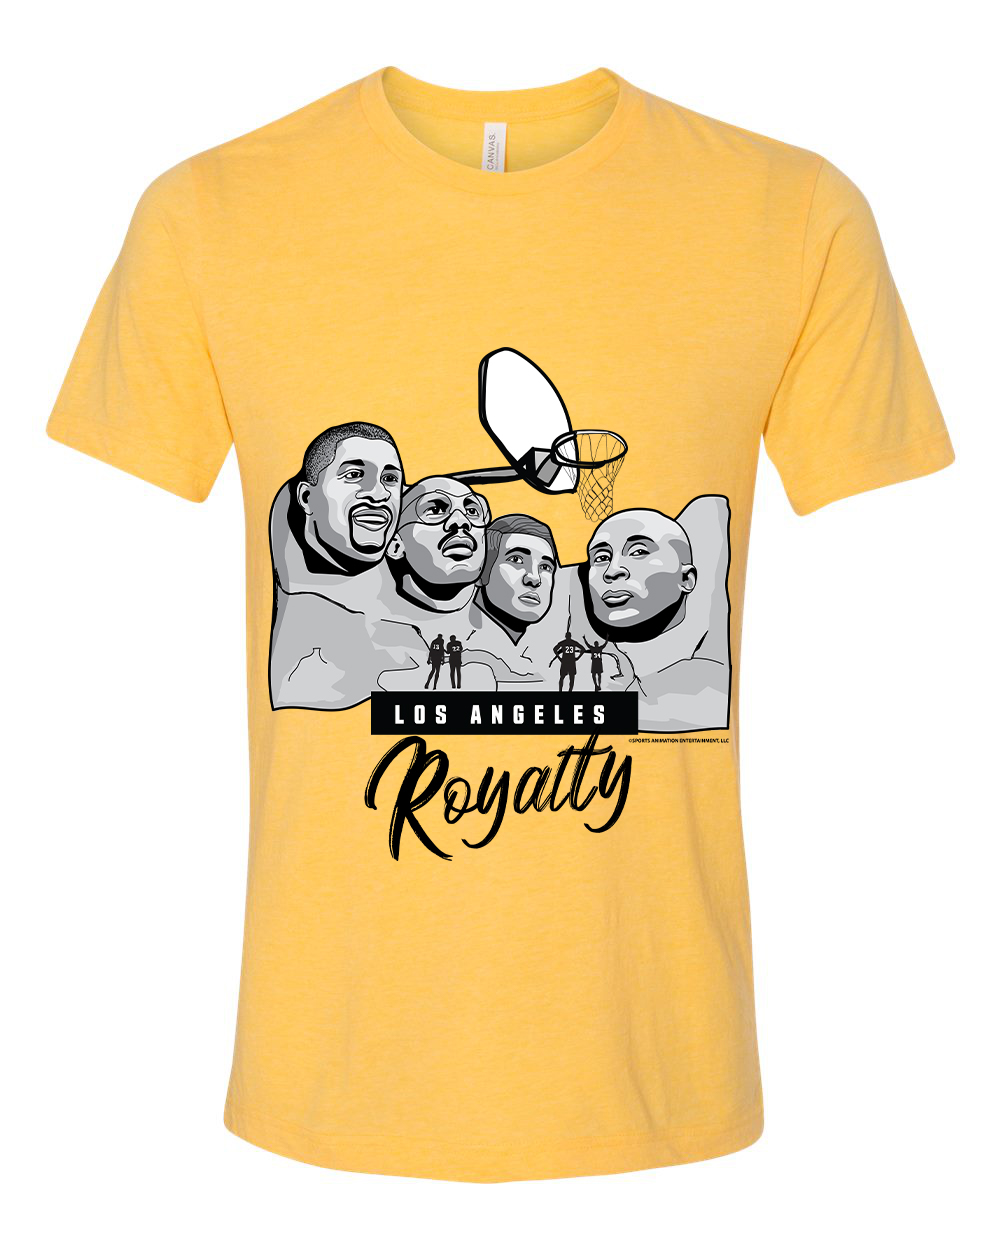 Mount Rushmore - Basketball Los Angeles Royalty (Gold)